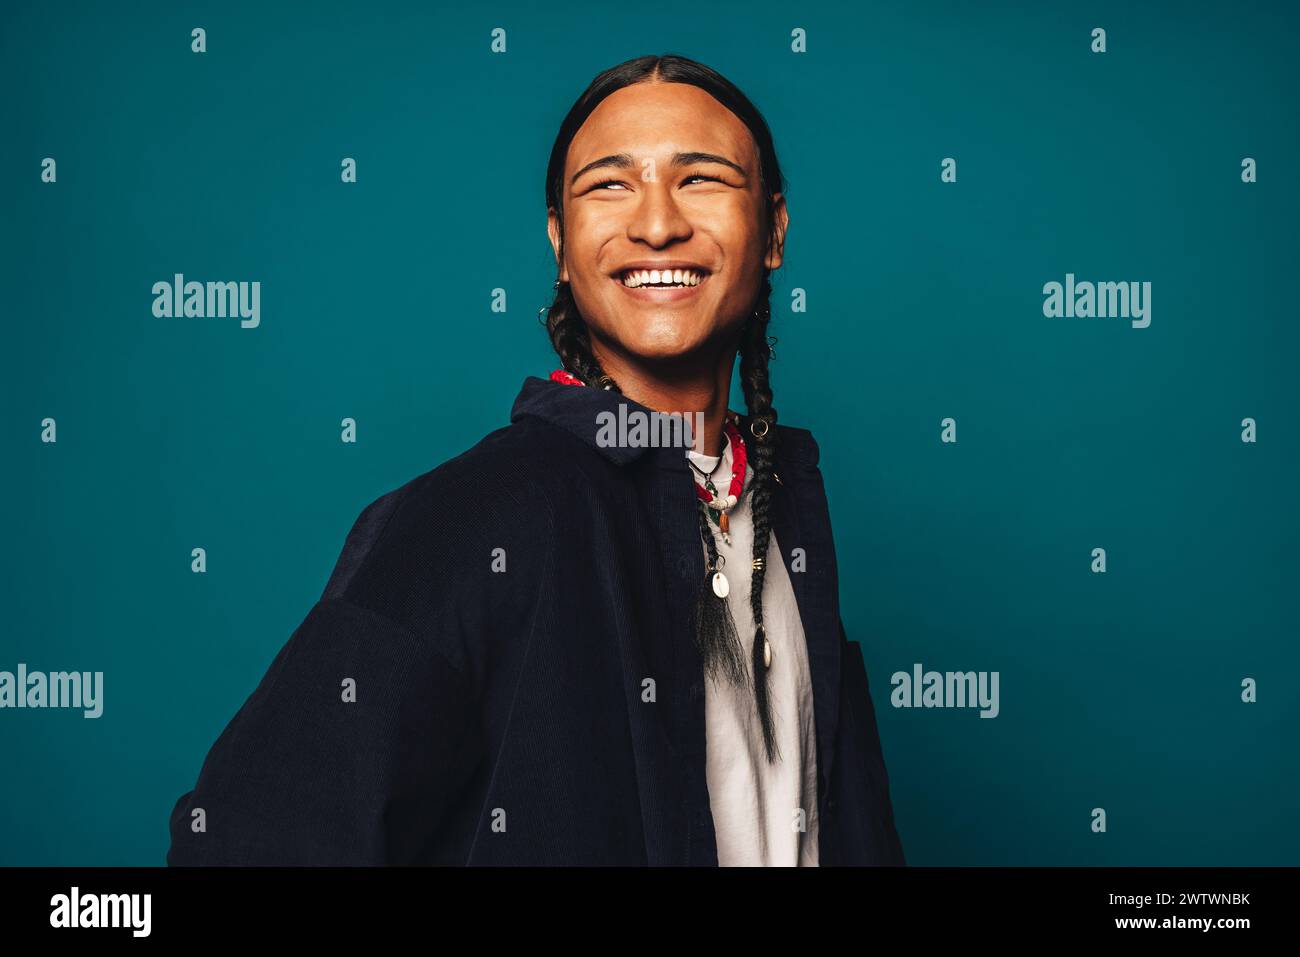 Confident, cheerful and stylish young man with braided hair stands against a blue background. Ethnic jewelry and casual clothing complement his unique Stock Photo